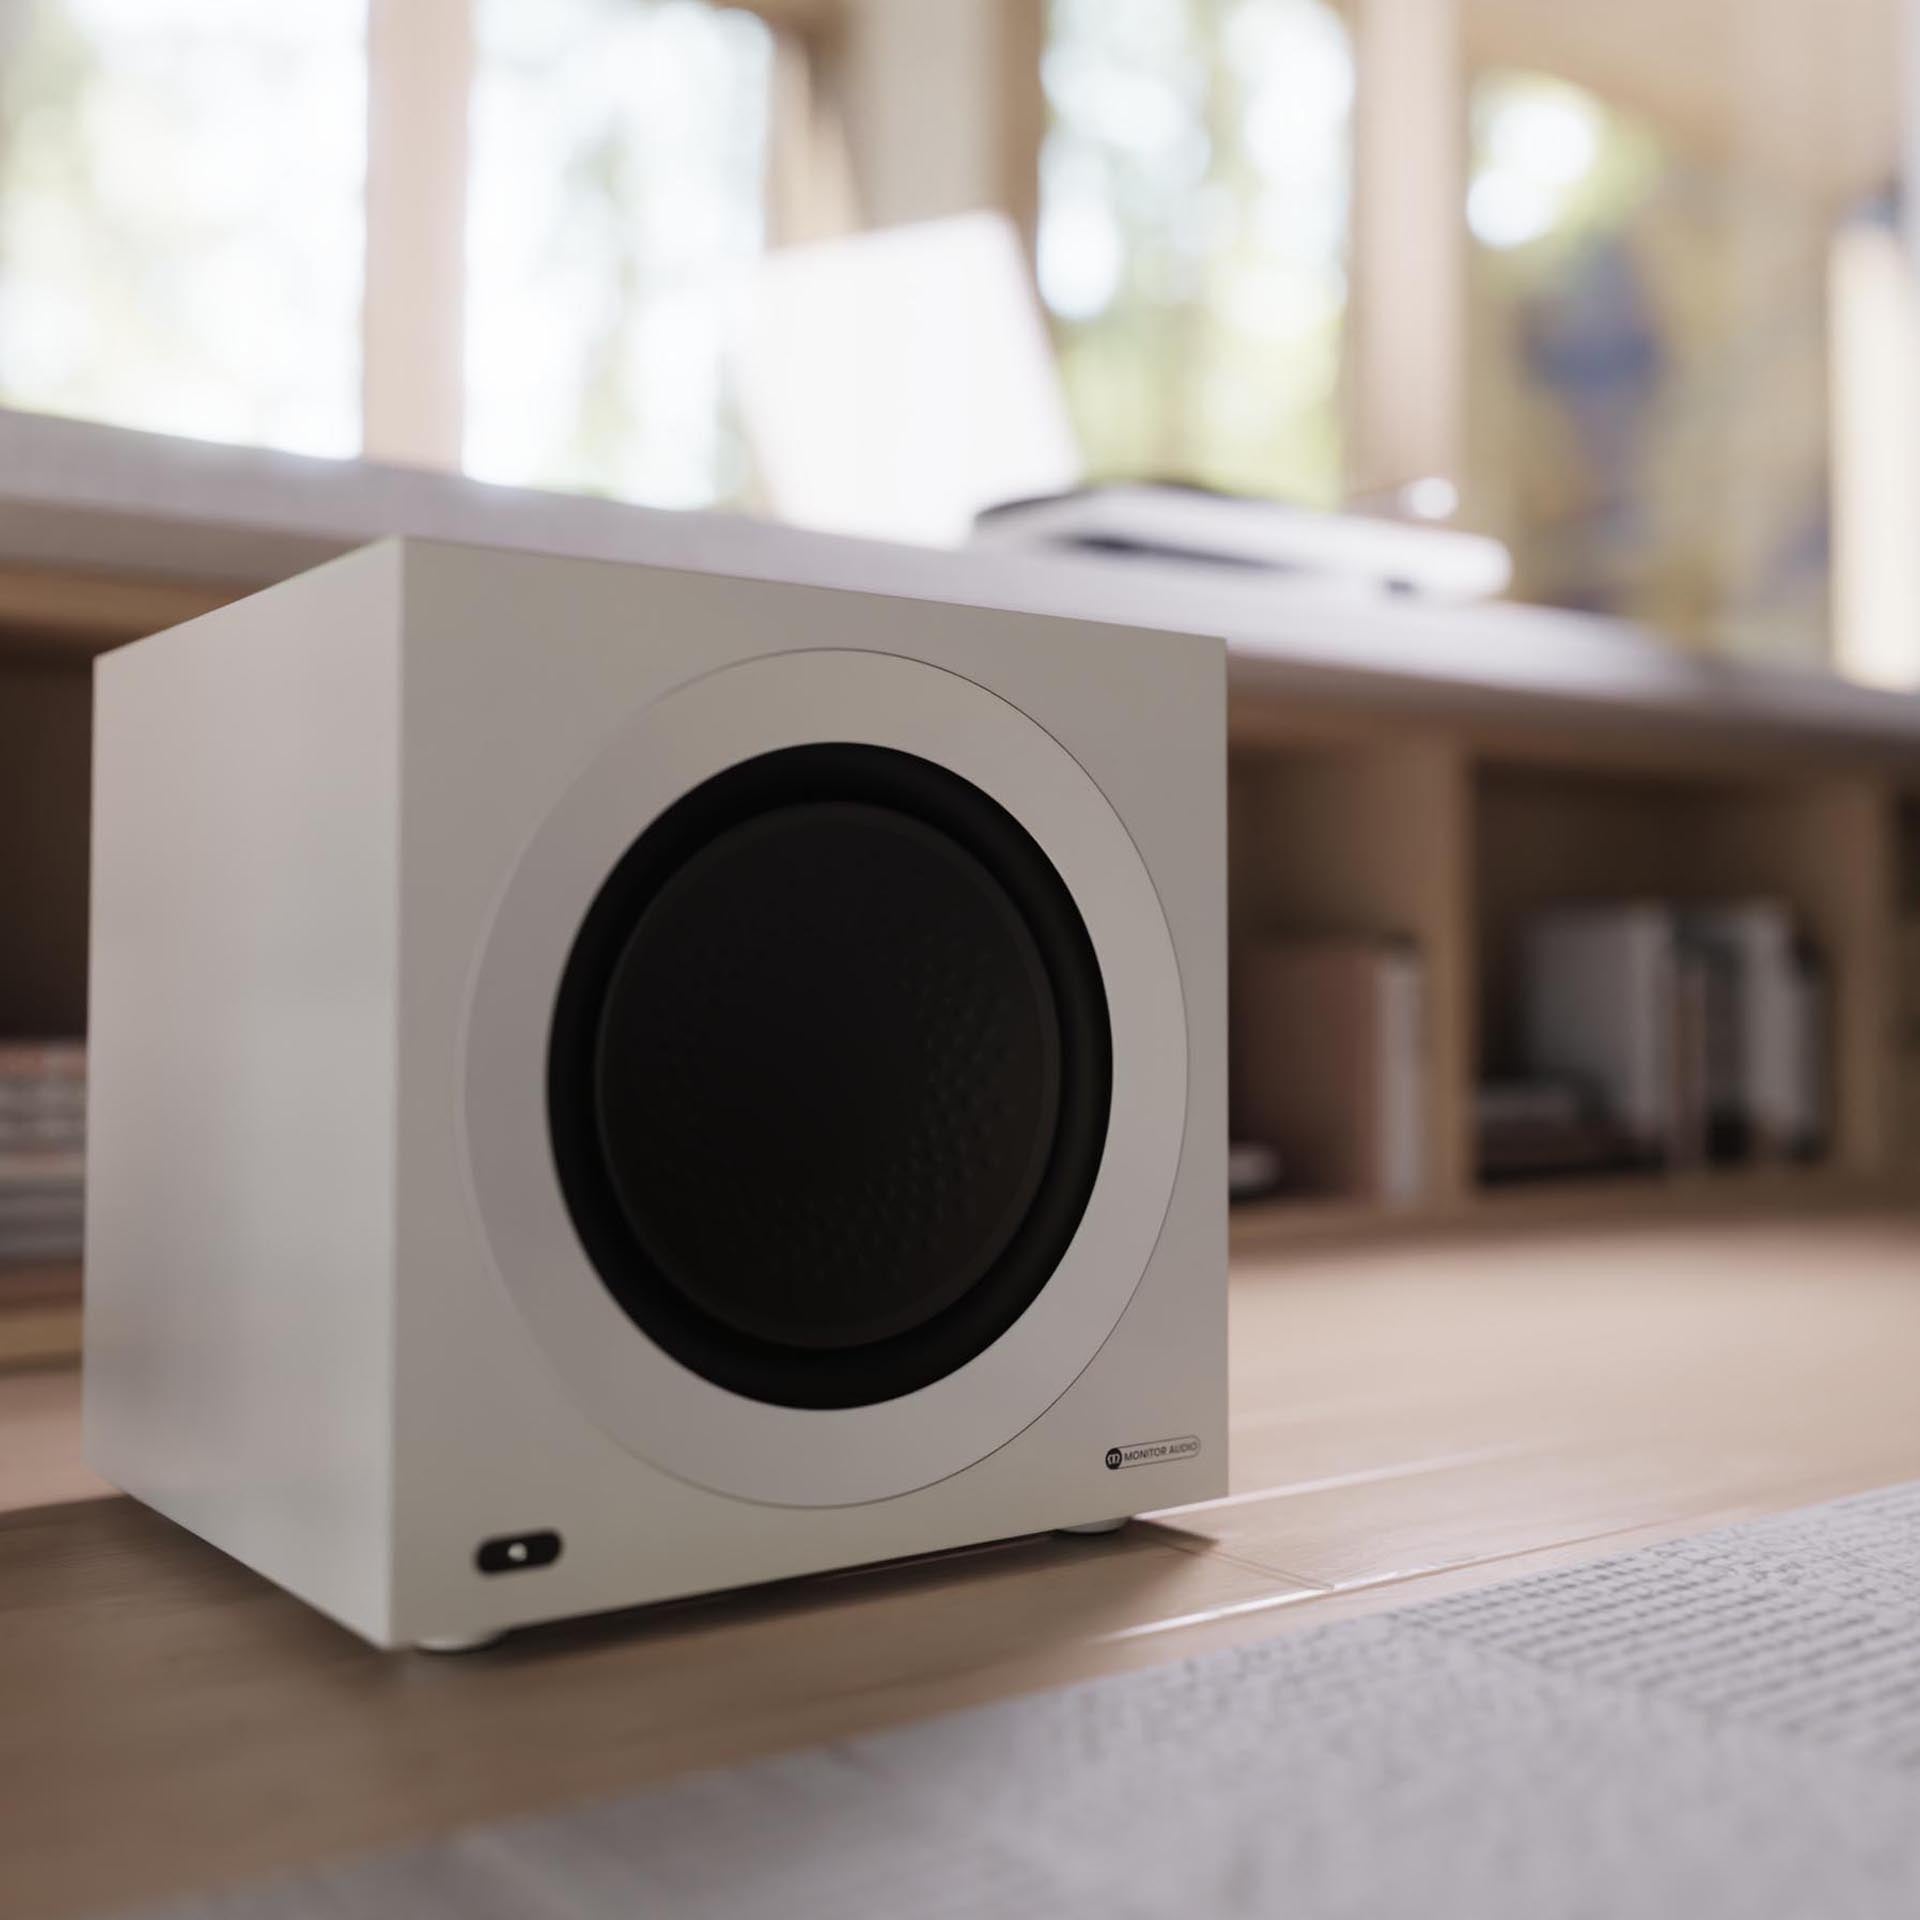 Monitor Audio Anthra W12 12" Active Subwoofer - White ( Available in August.  Pre-order now)